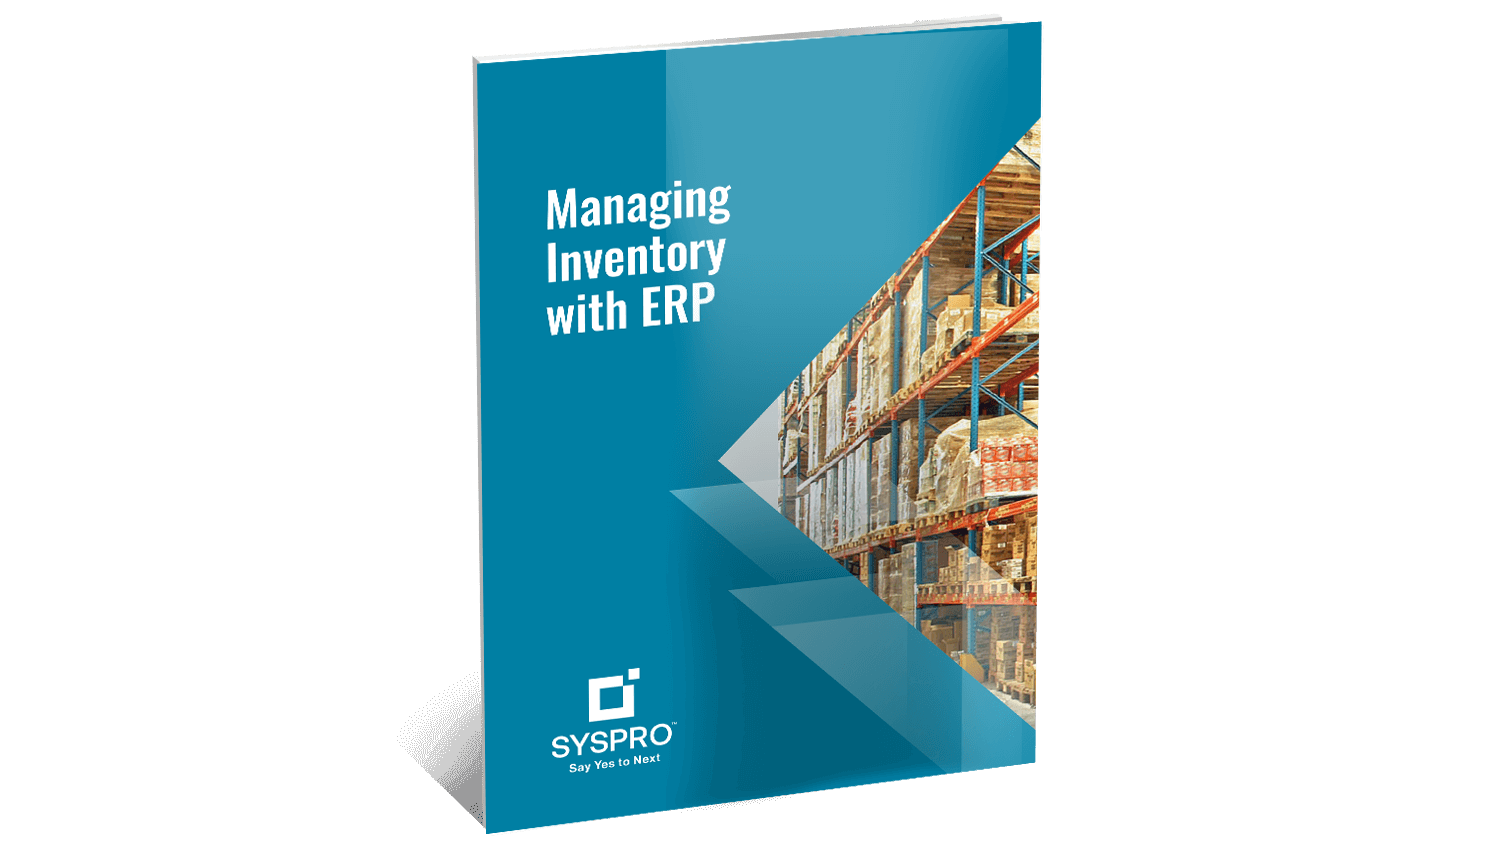 SYSPRO-ERP-software-system-Managing-inventory-with-syspro-brochure